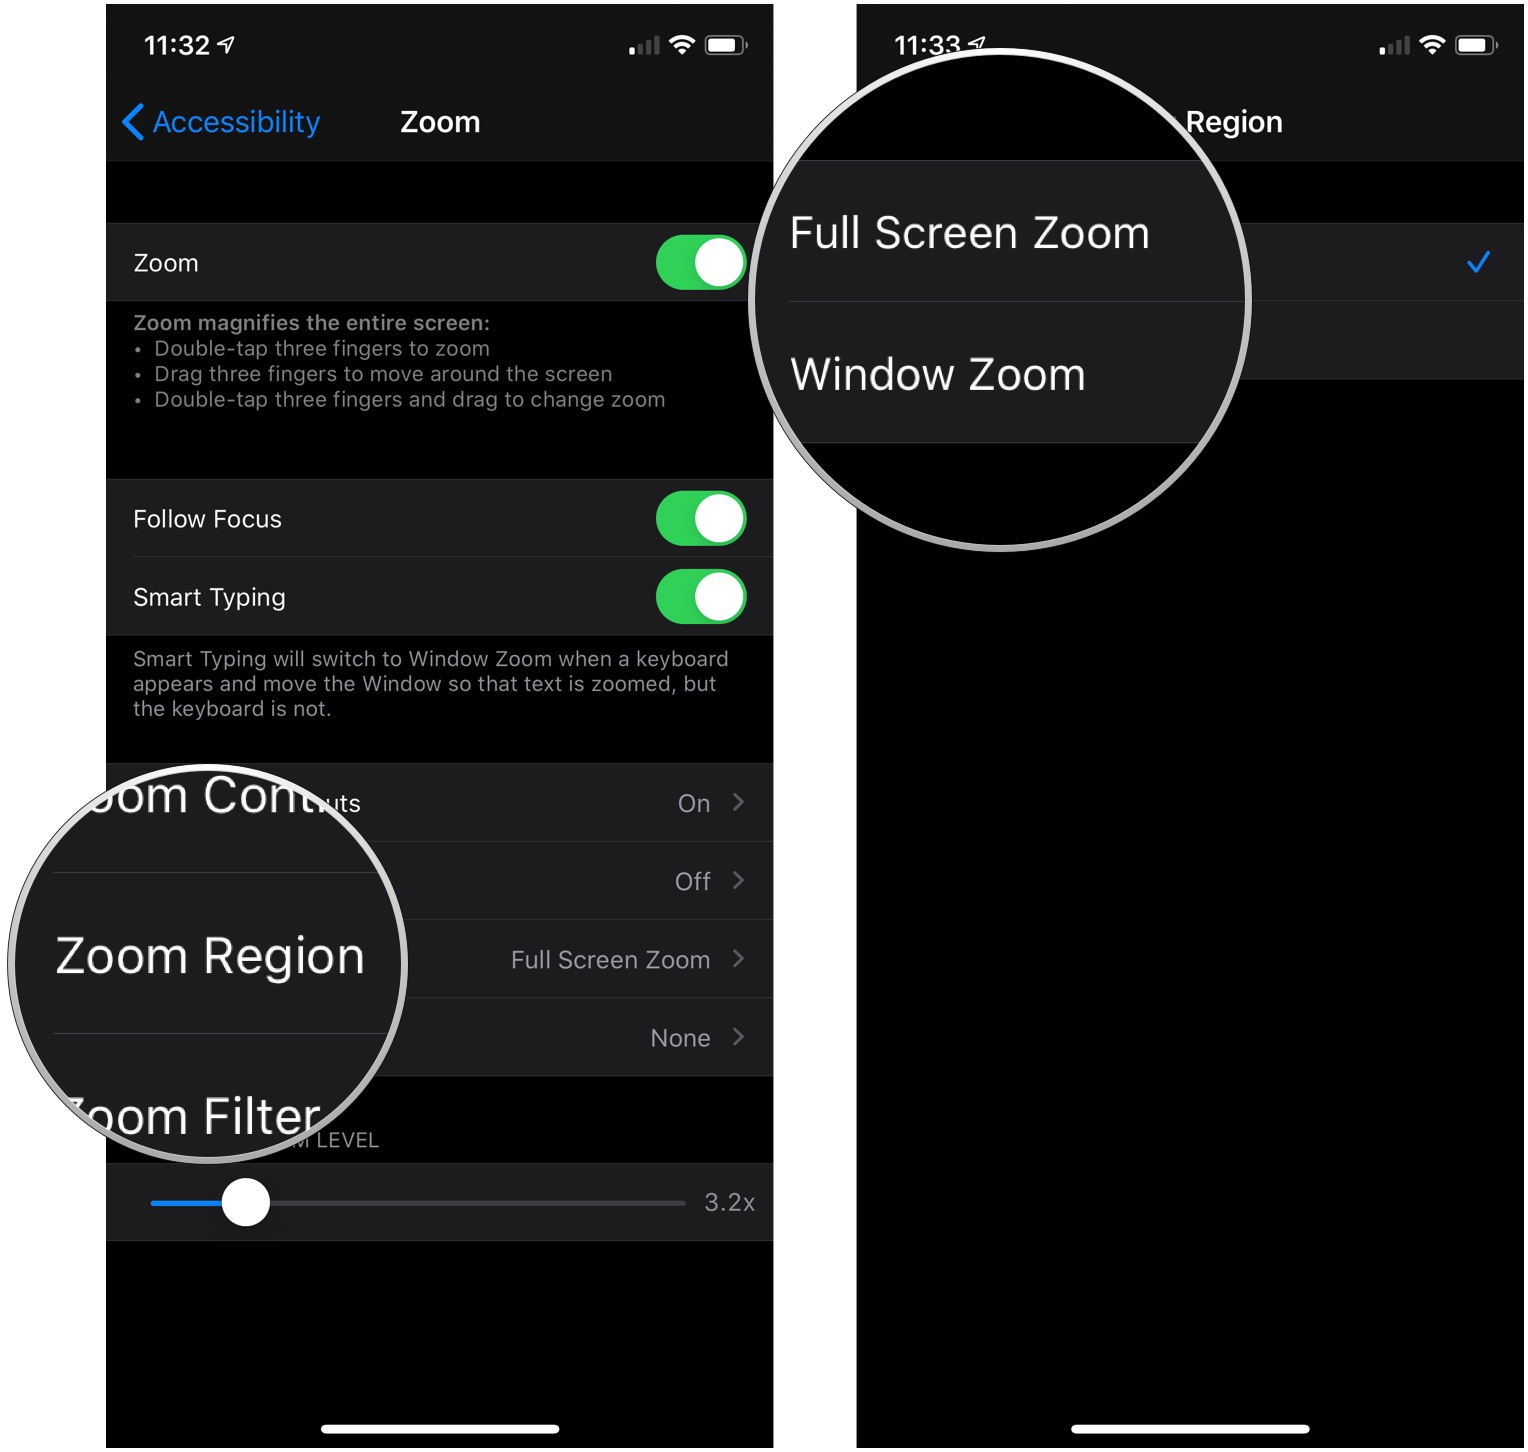 Change the zoom region by showing how to touch the zoom region in the zoom setting and then touch Full screen zoom or Window zoom